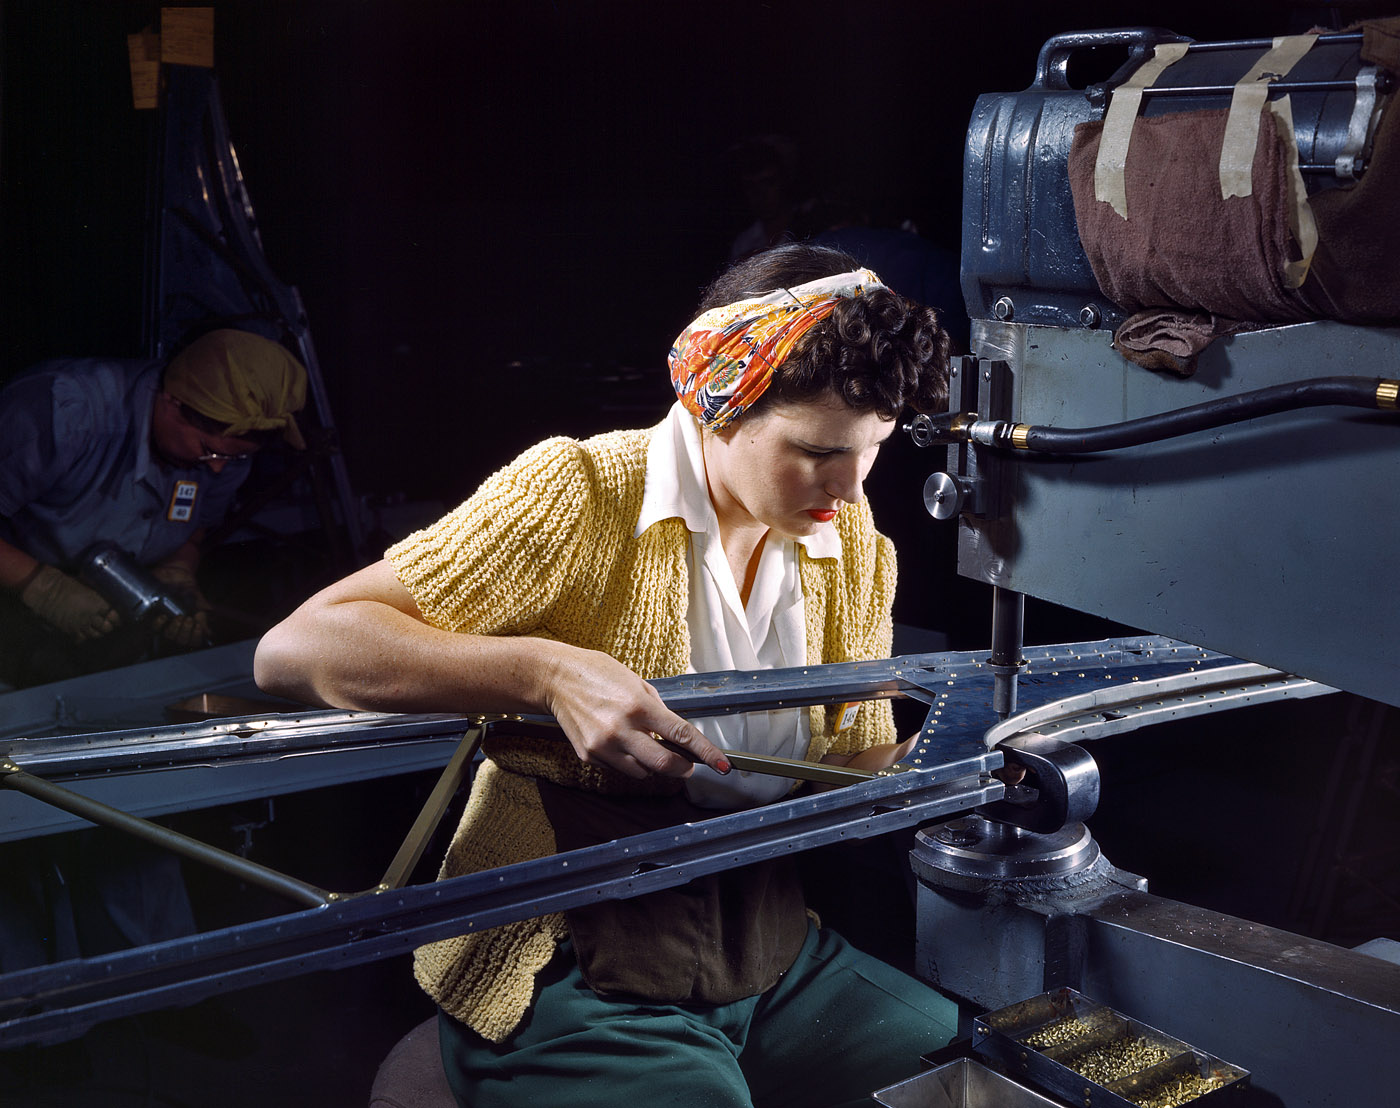 October 1942. Long Beach, California. "Girl riveting machine operator at the Douglas Aircraft Company plant joins sections of wing ribs to reinforce the inner wing assemblies of B-17F heavy bombers." View full size. 4x5 Kodachrome transparency by Alfred Palmer for the Office of War Information.
